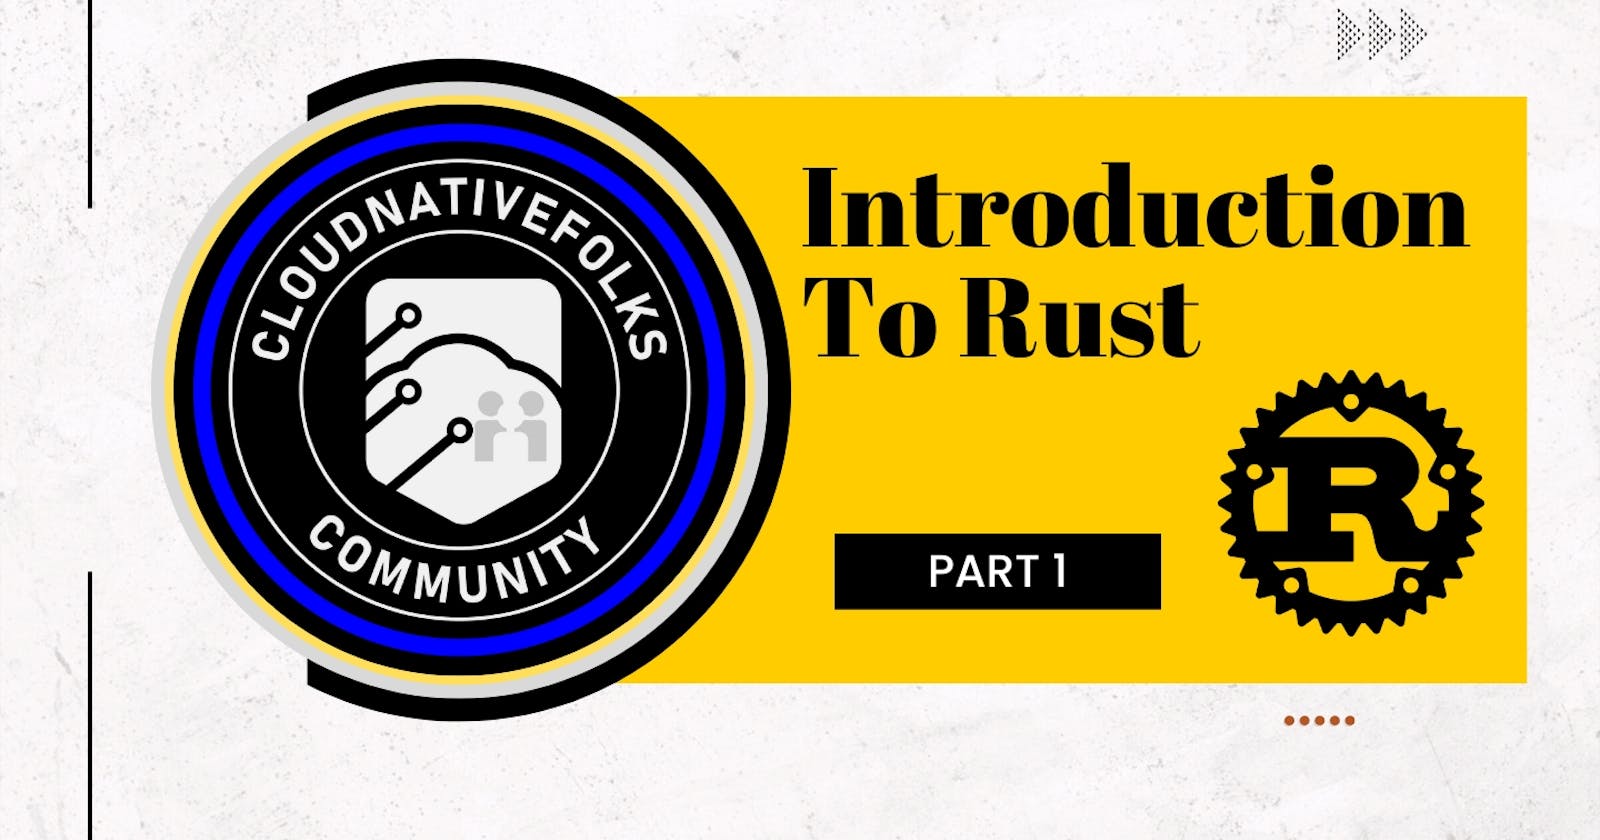 Introduction To Rust - Part 1